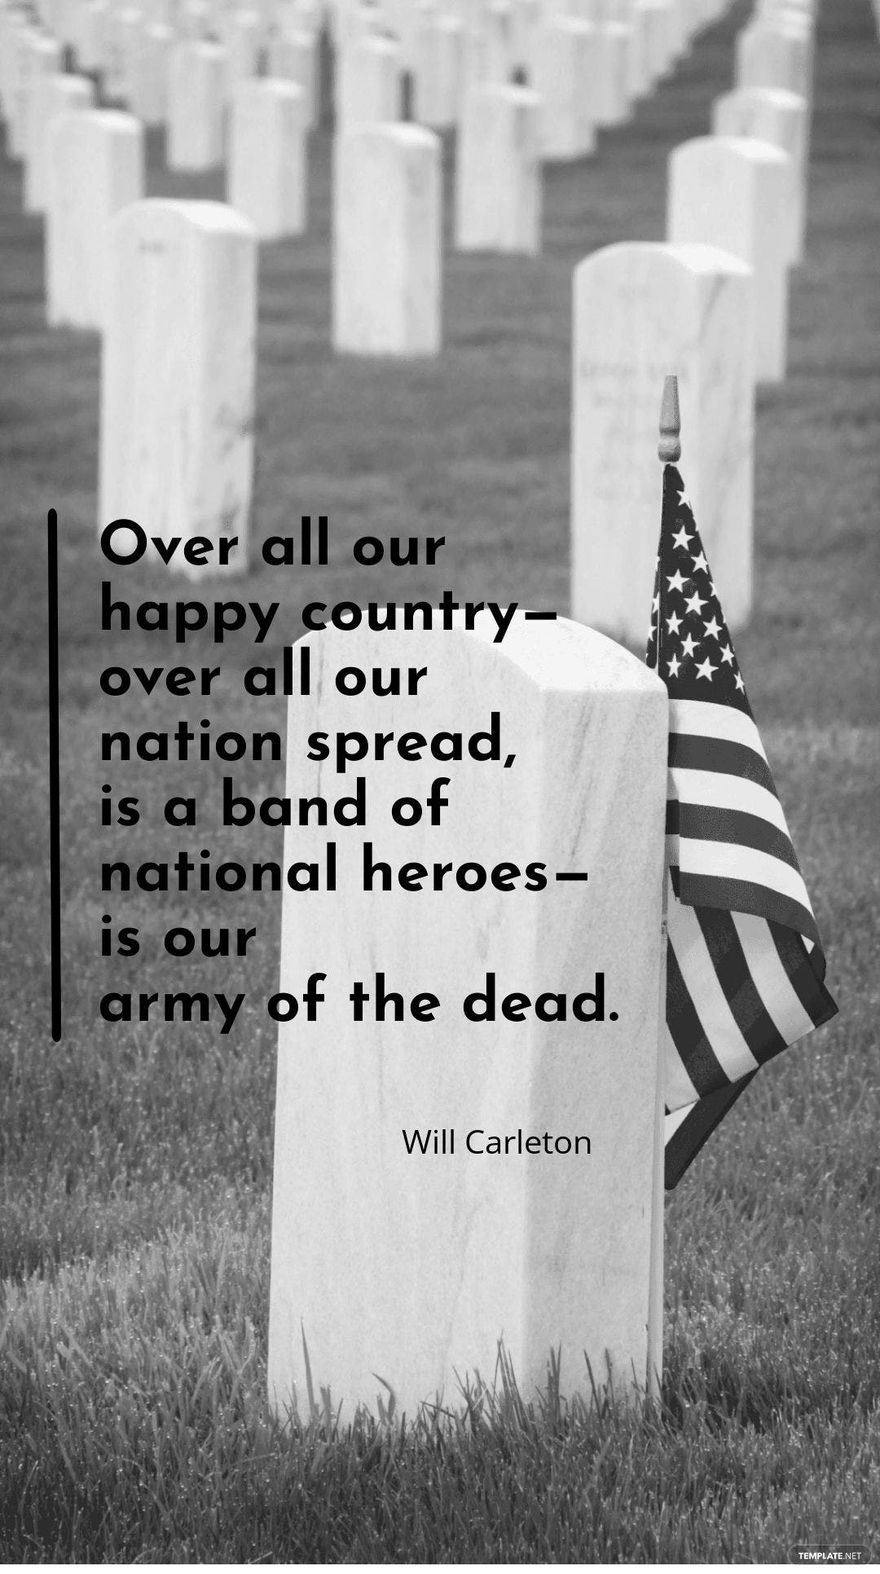 Will Carleton - Over all our happy country - over all our nation spread, is a band of national heroes - is our army of the dead.